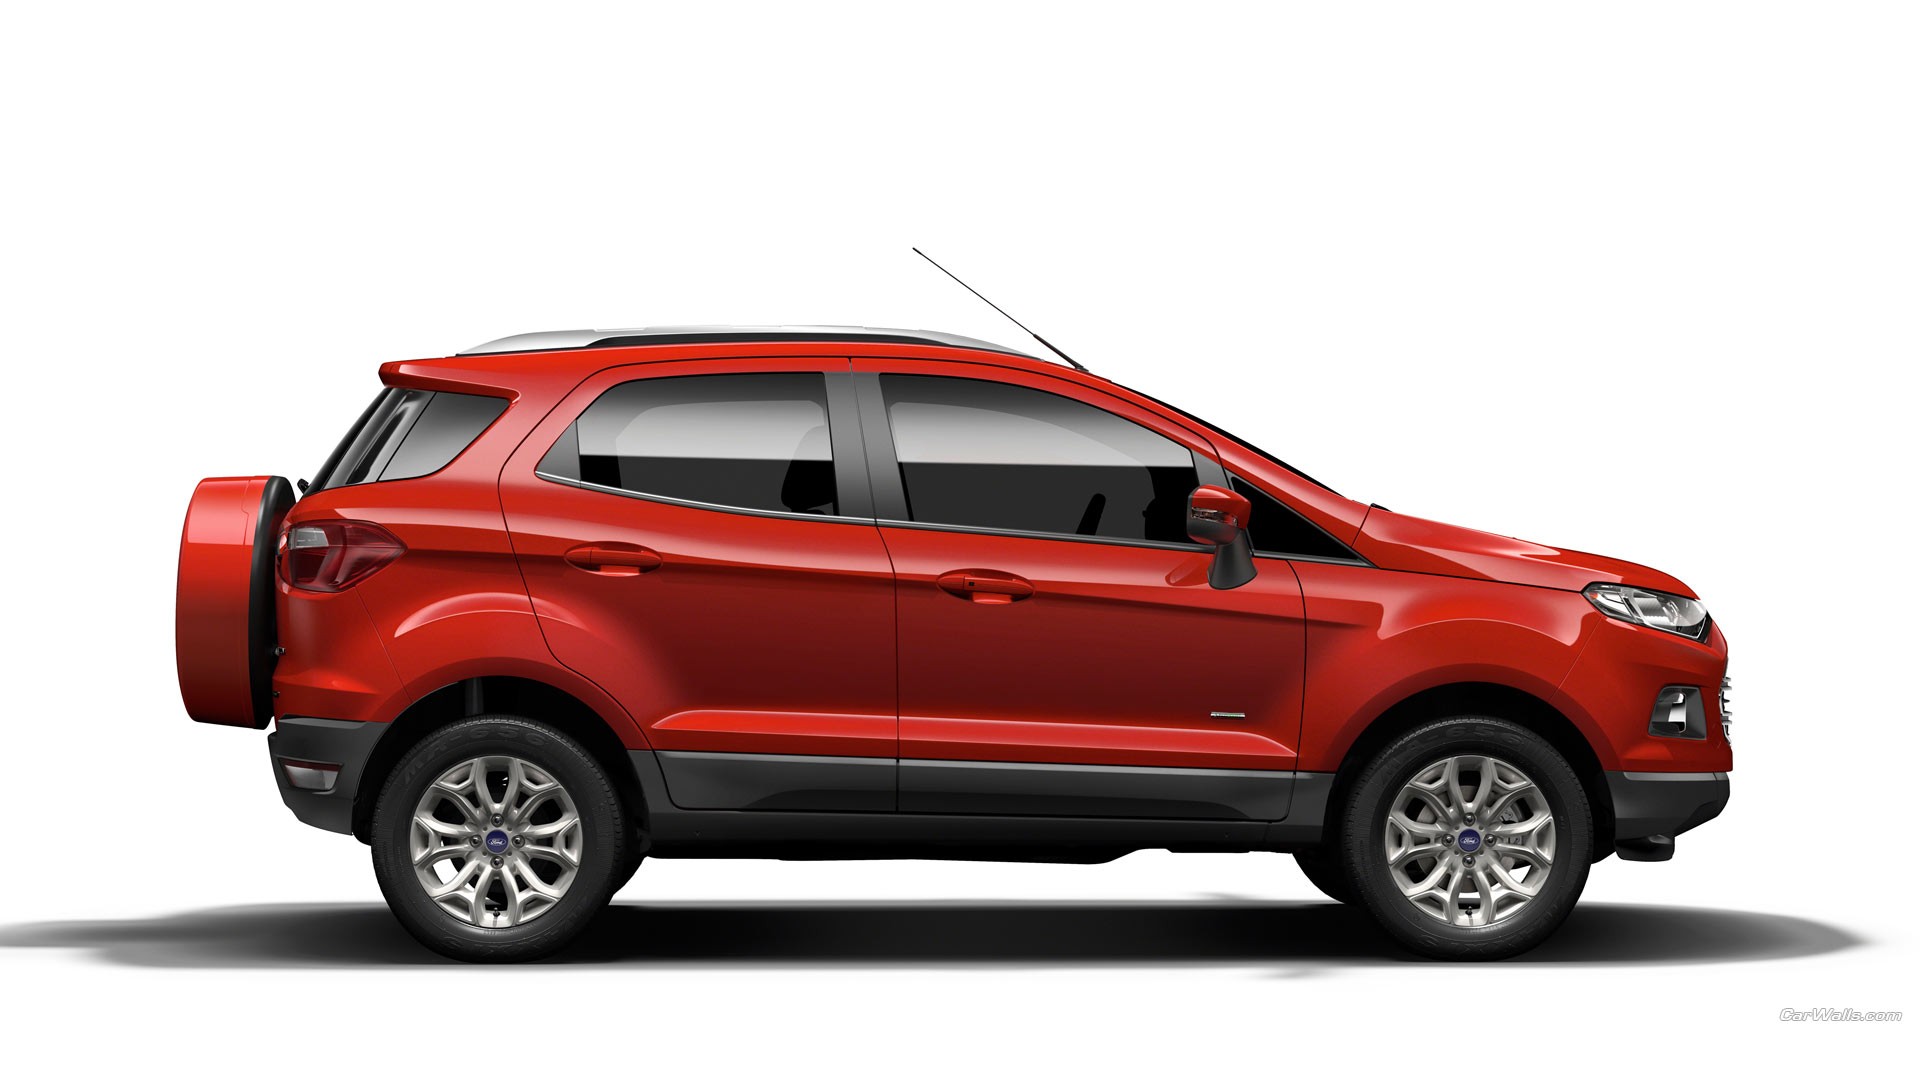 General 1920x1080 Ford EcoSport Ford car vehicle red cars simple background watermarked Brazilian cars